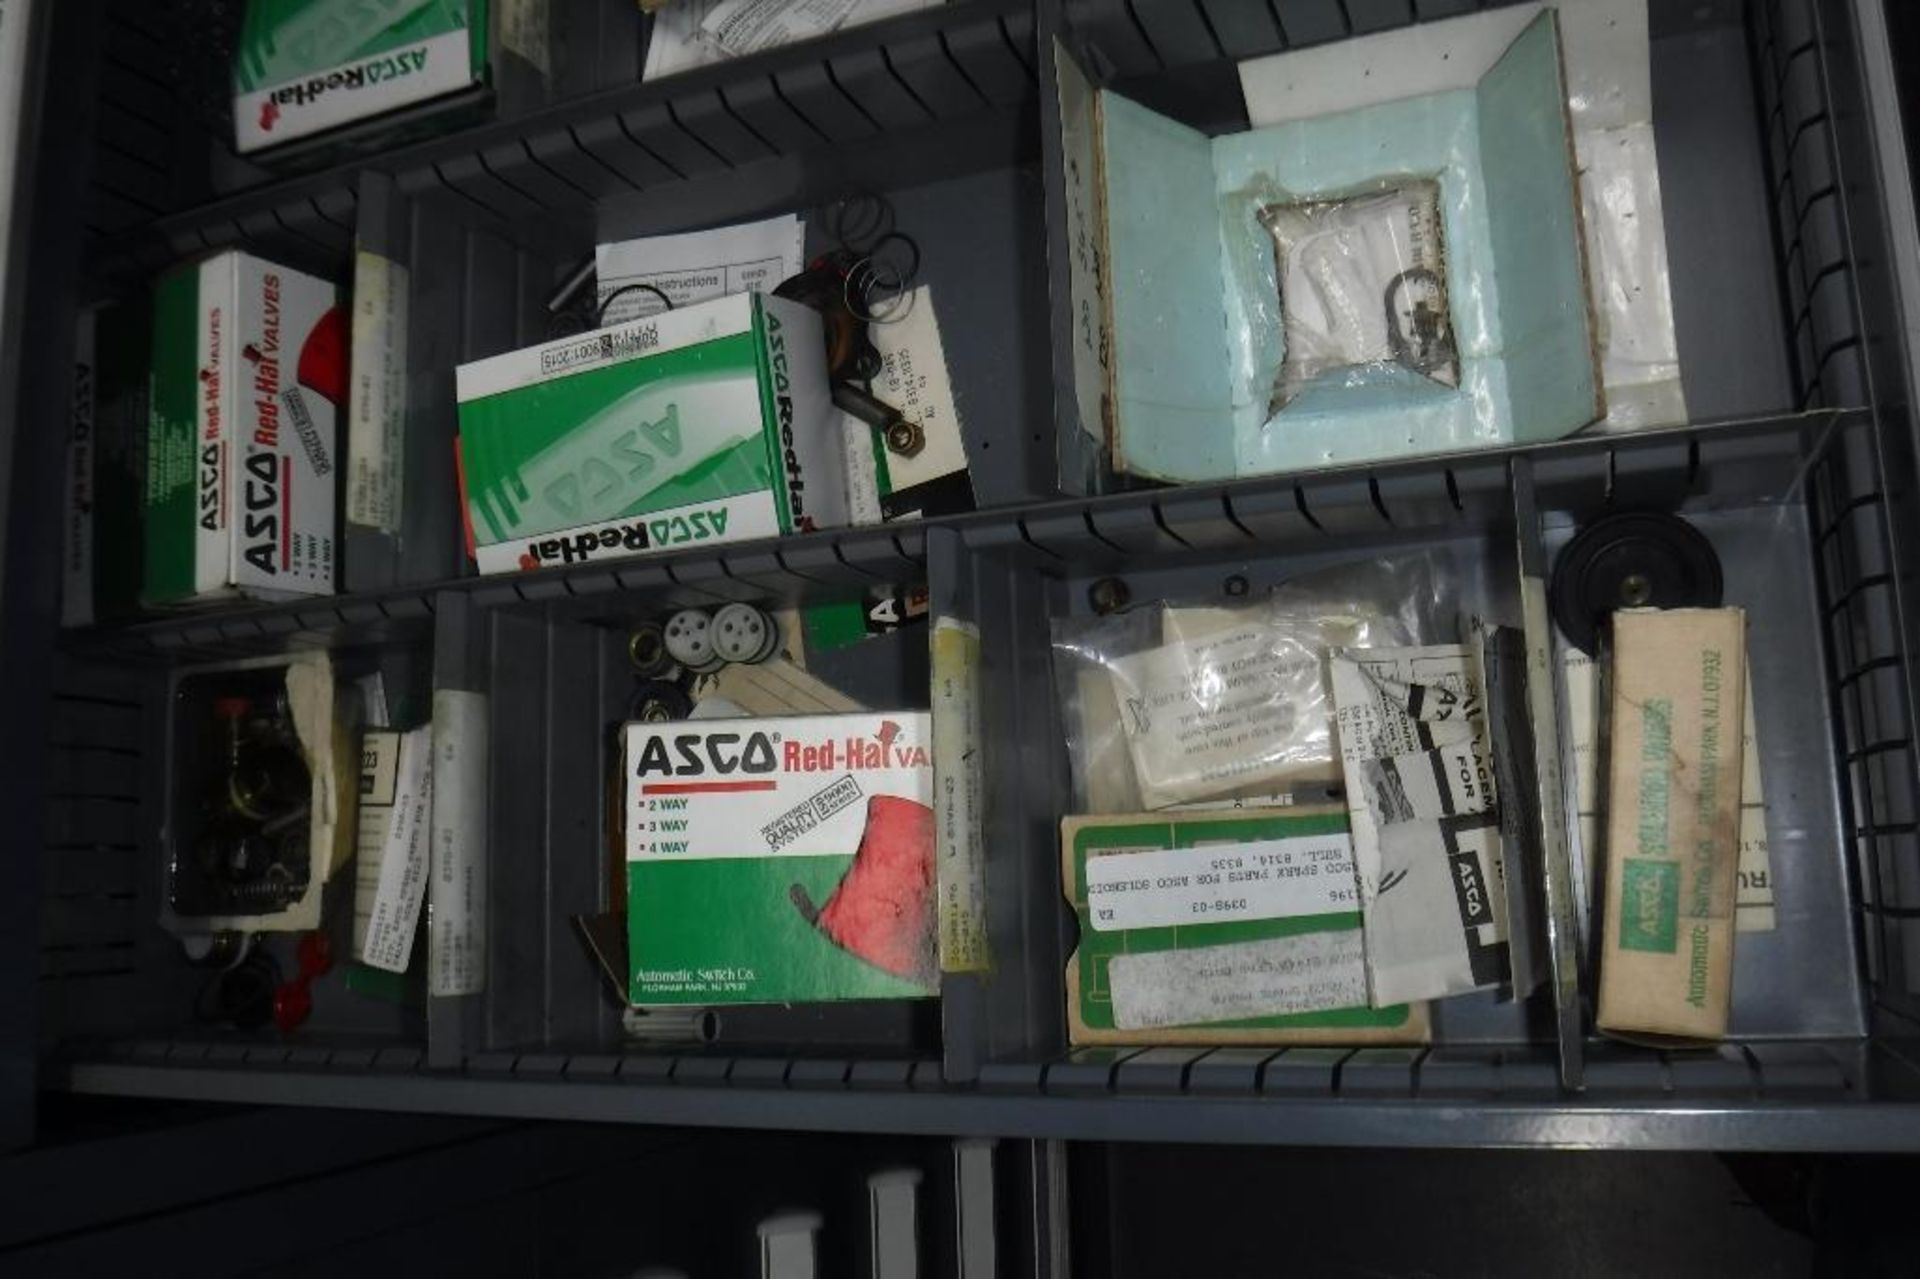 8-Drawer Vidmar Cabinet with Contents-Automatic Valve Corp., ASCO, Ross, Automatic Allenair, Whitelo - Image 9 of 13